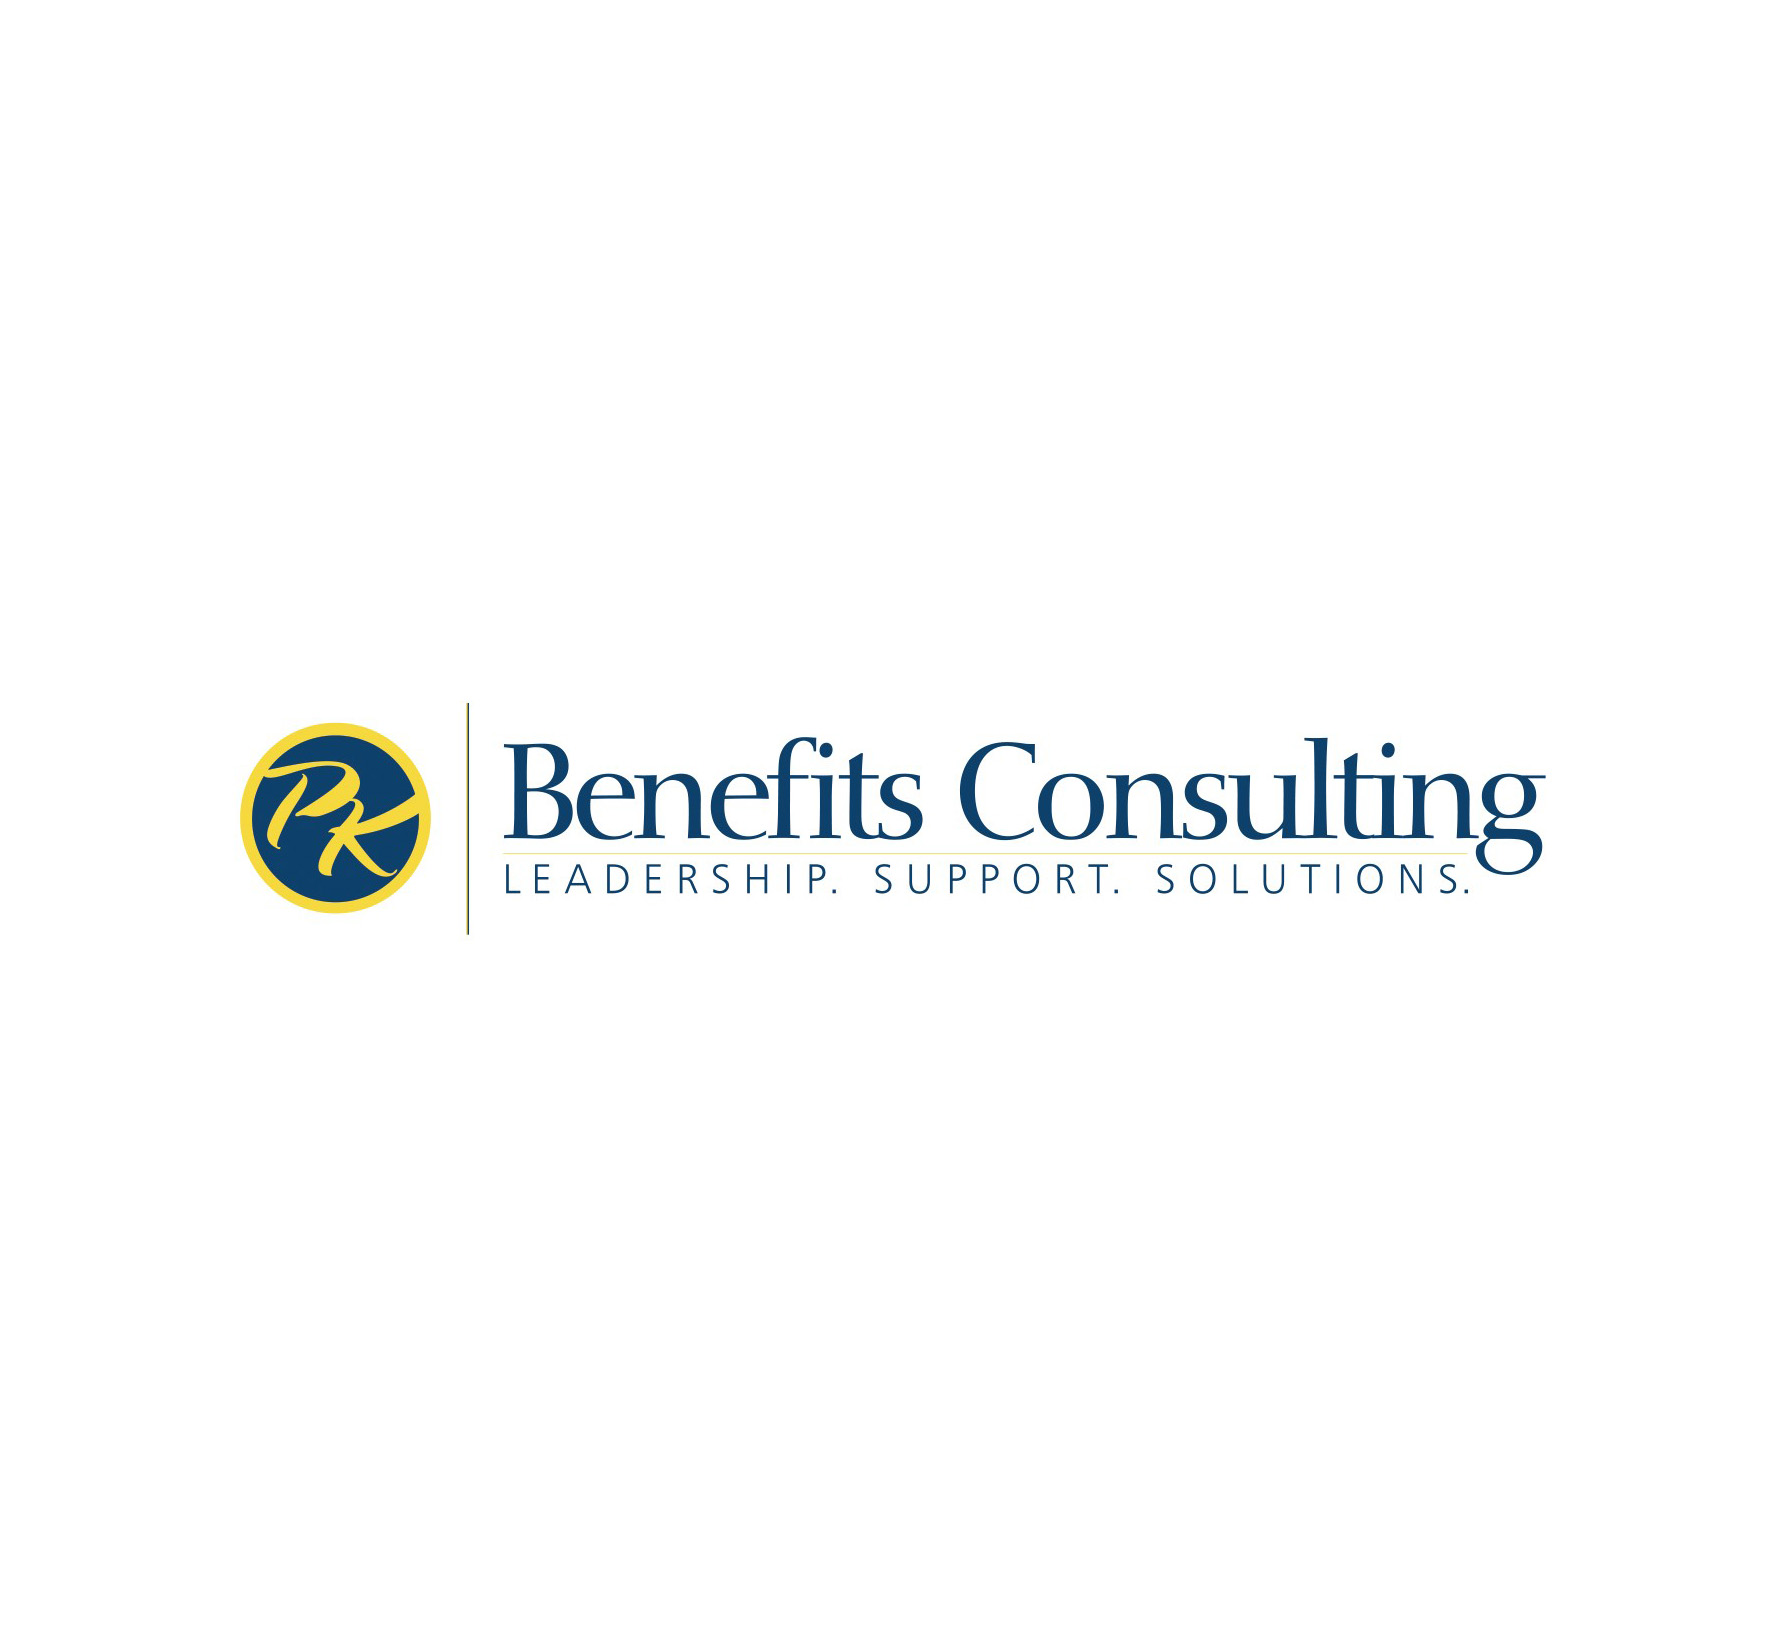 PK Benefits Consulting